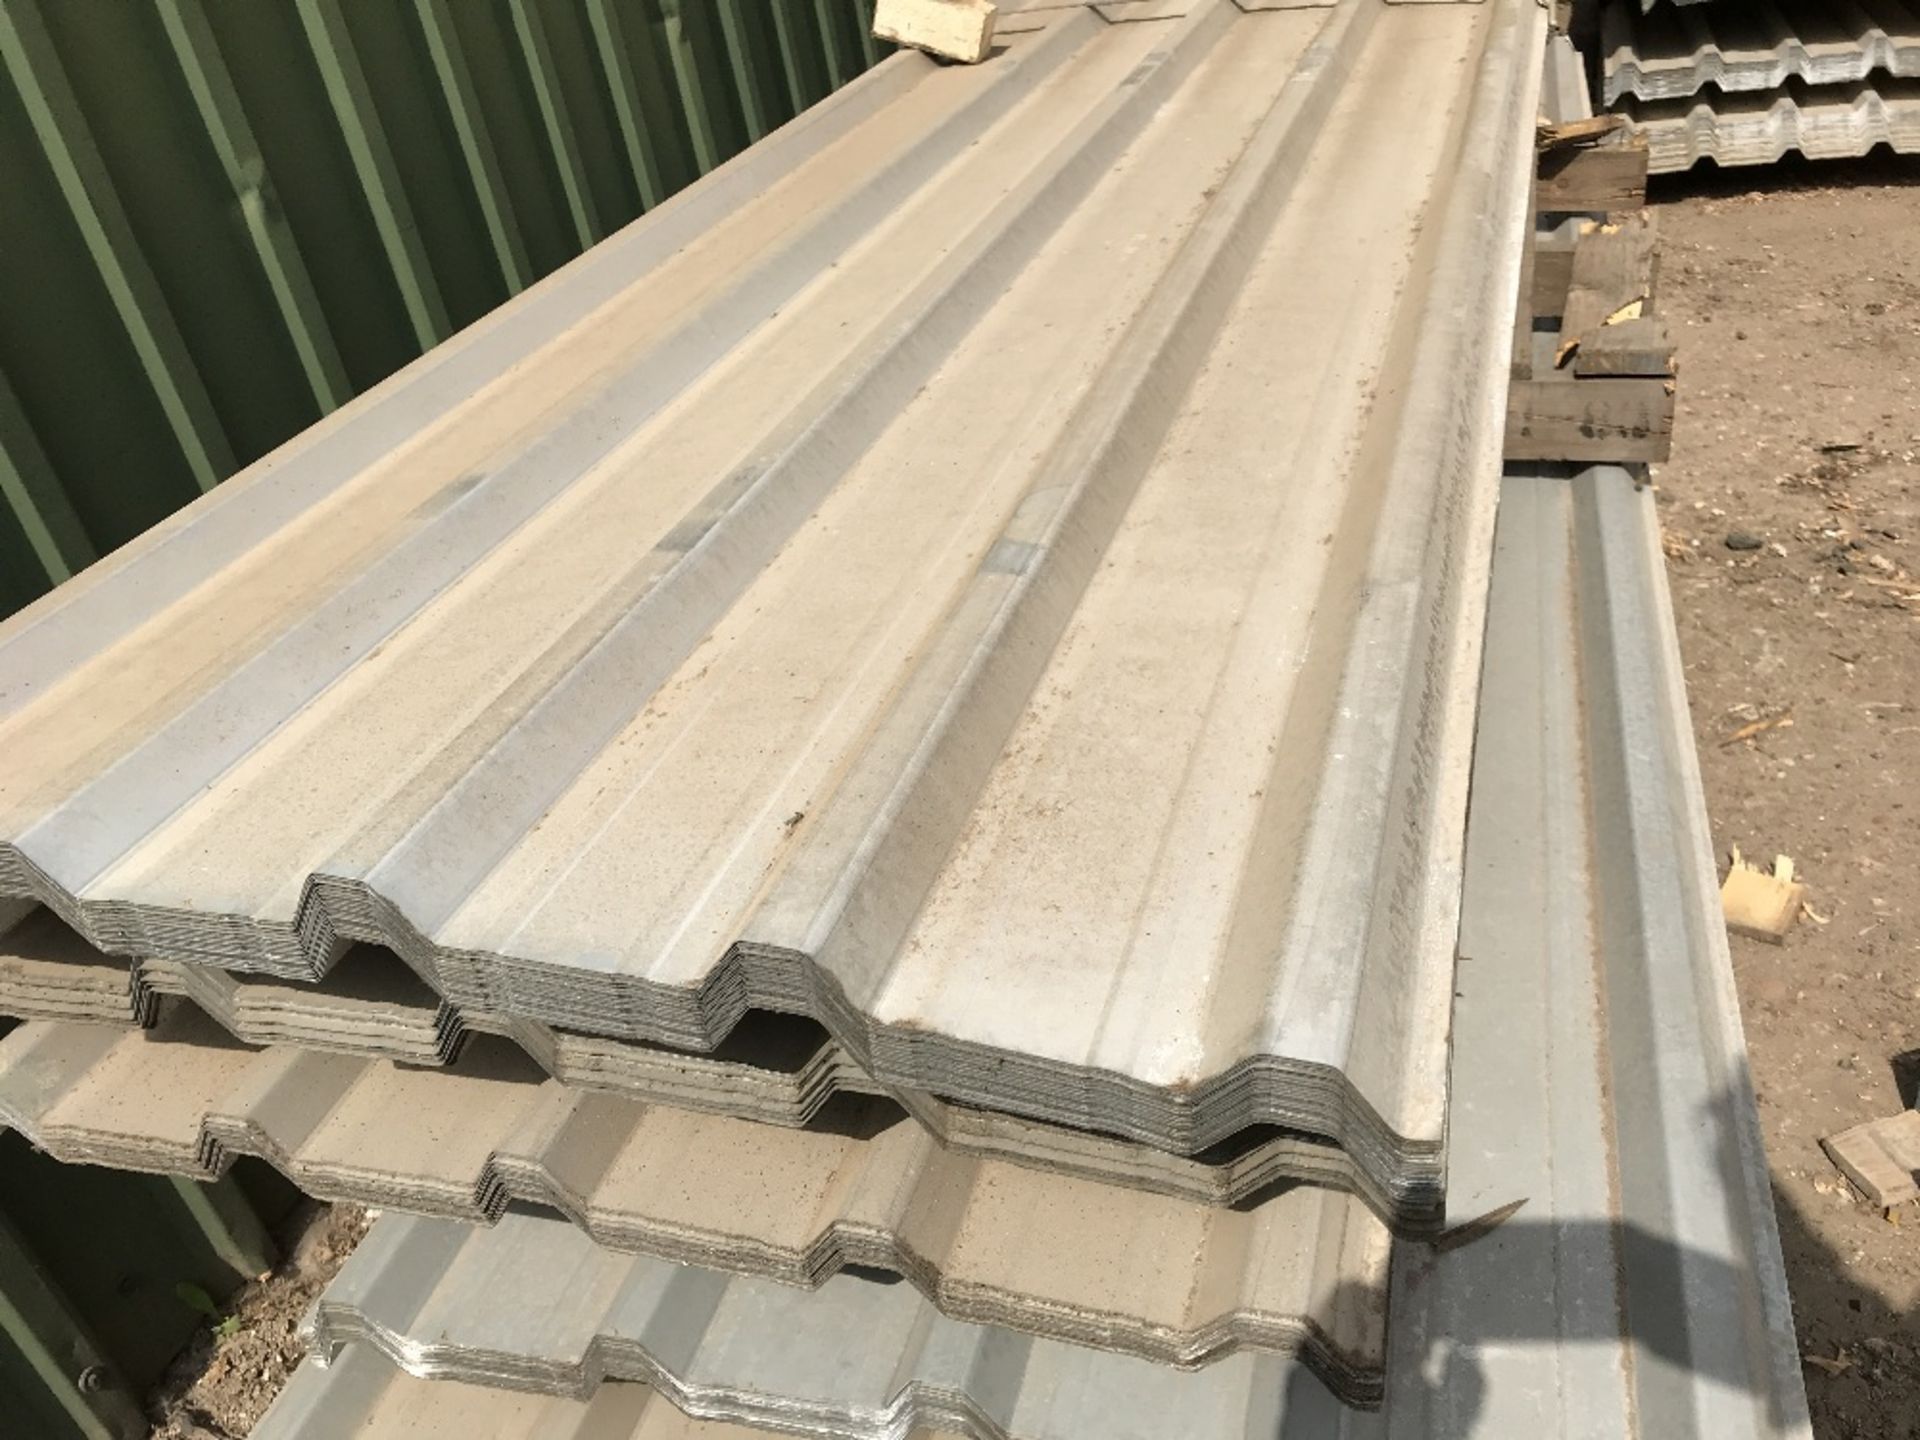 Pack of 50no. 10ft galvanised box profile roof sheets